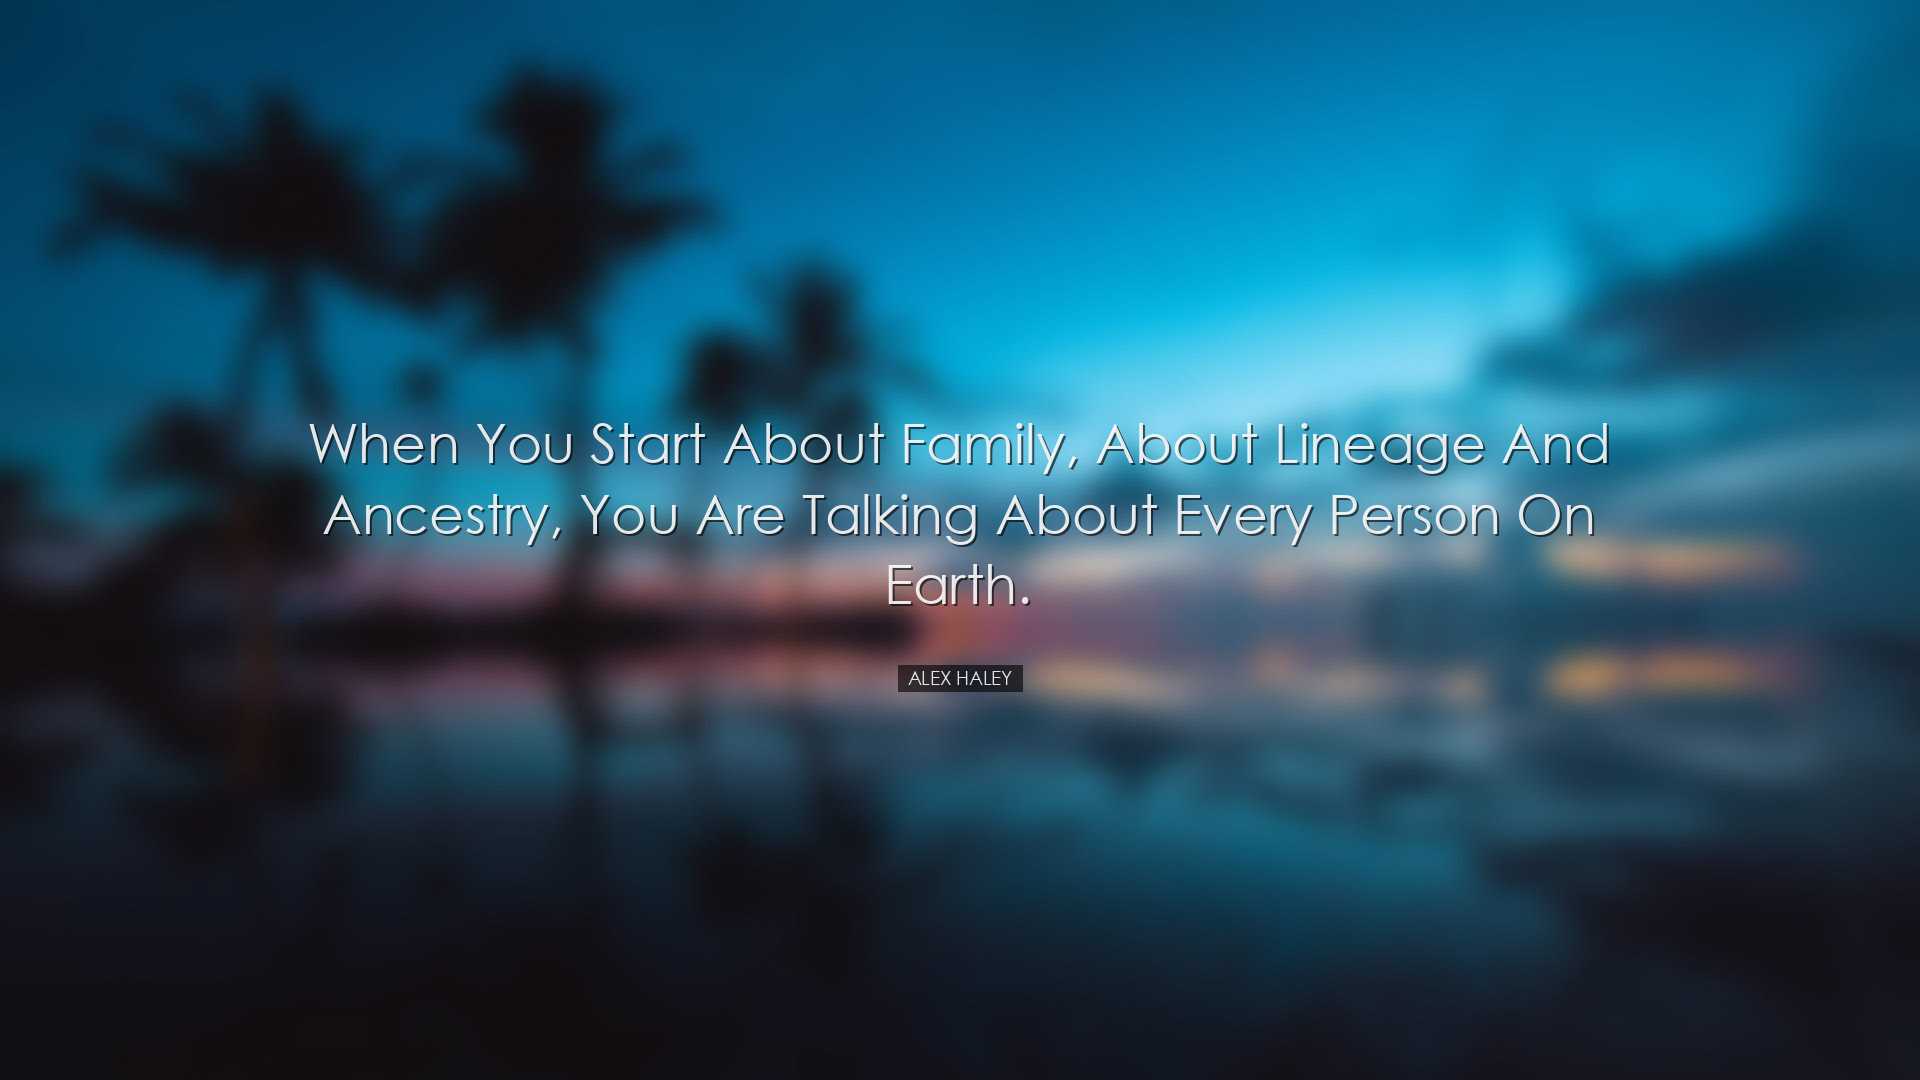 When you start about family, about lineage and ancestry, you are t